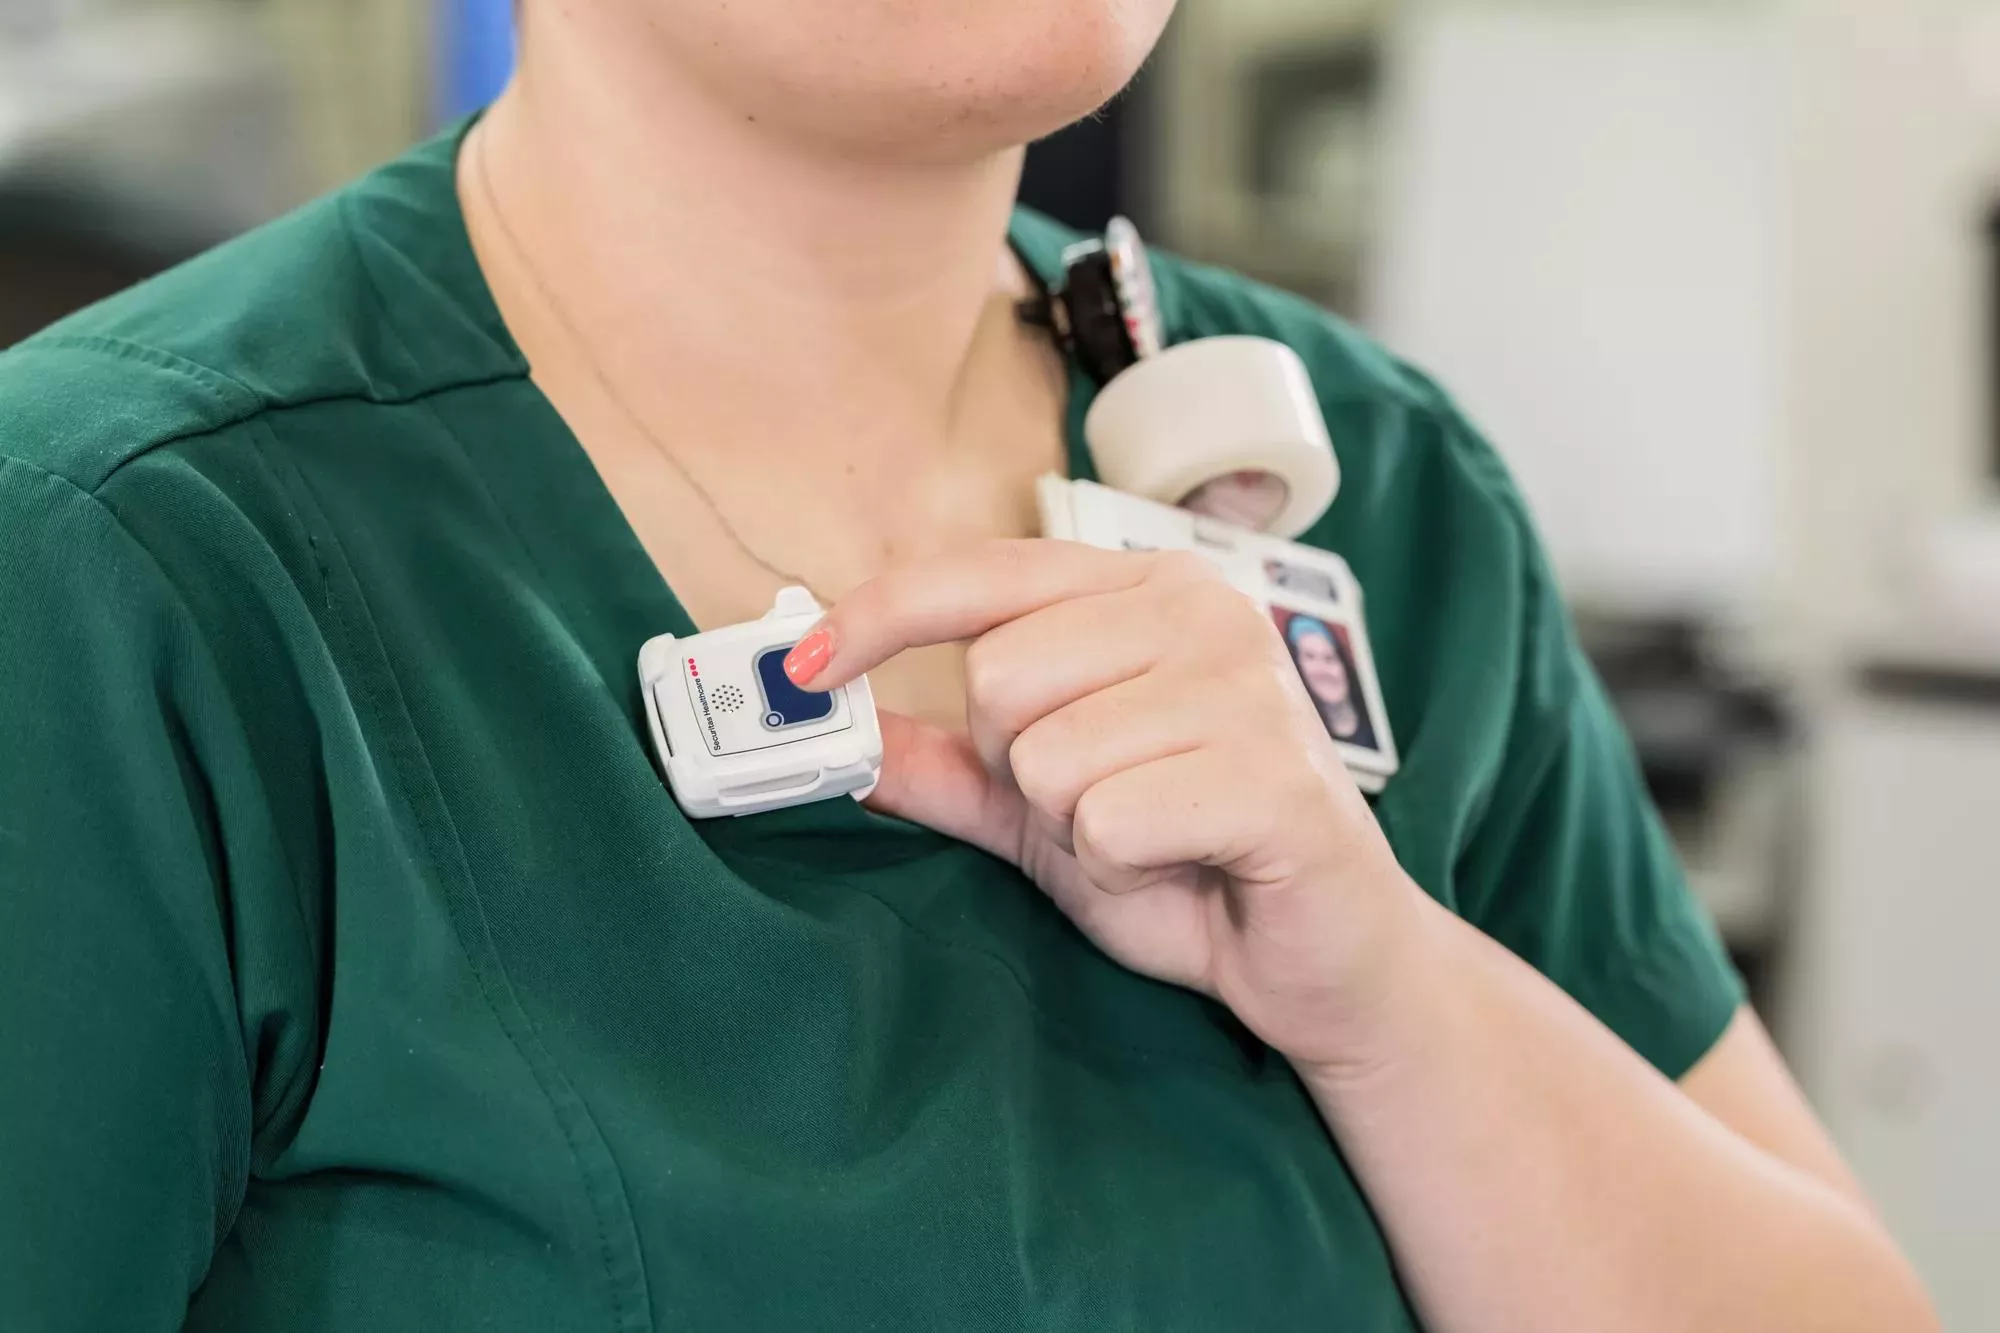 Staff protection badge being shown while the button is pressed. Securitas Healthcare.